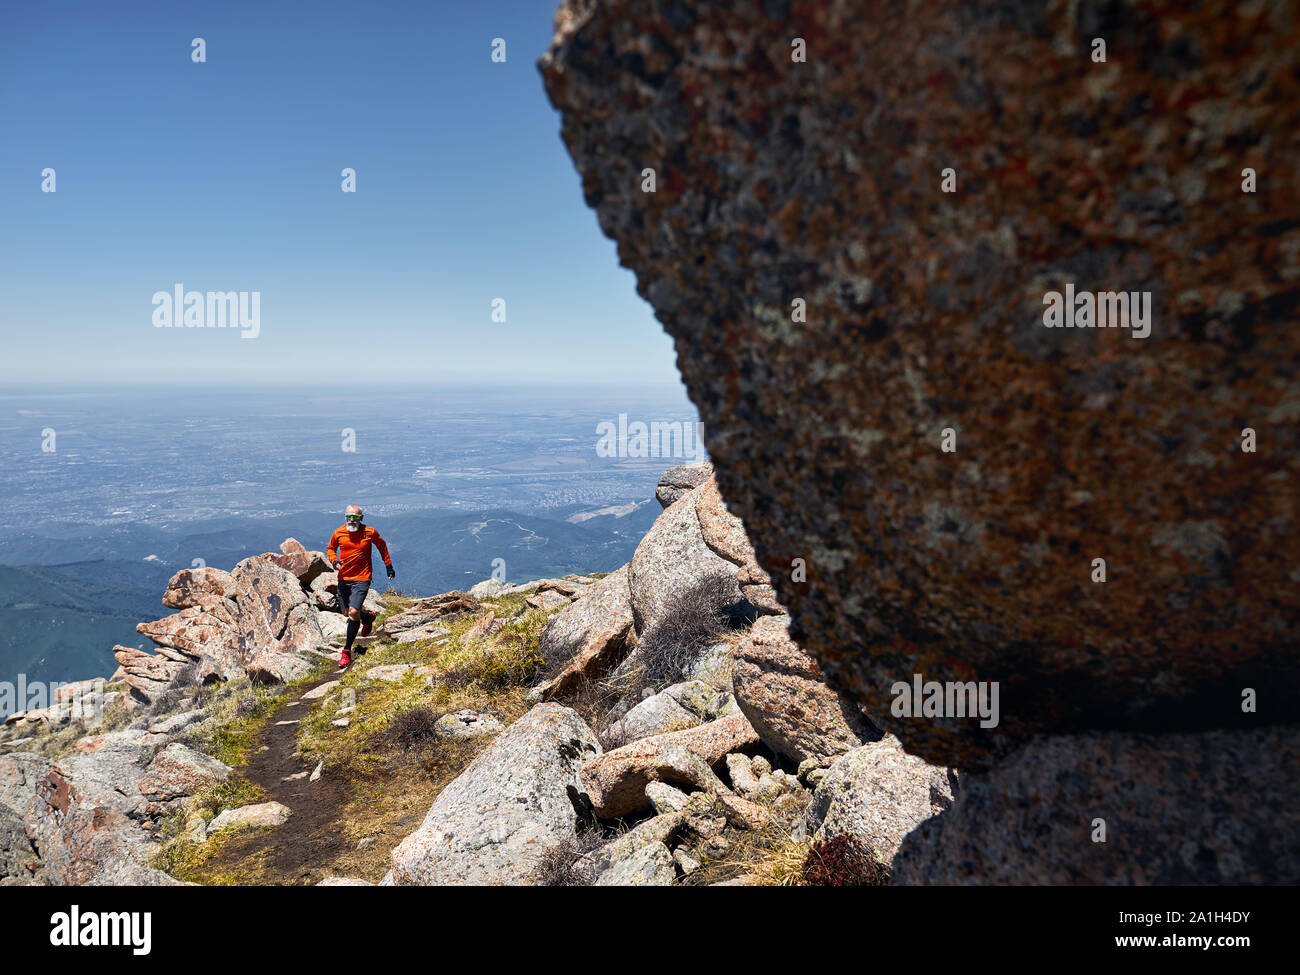 Runner athlete with beard in orange shirt running on the trail high in the mountains Stock Photo